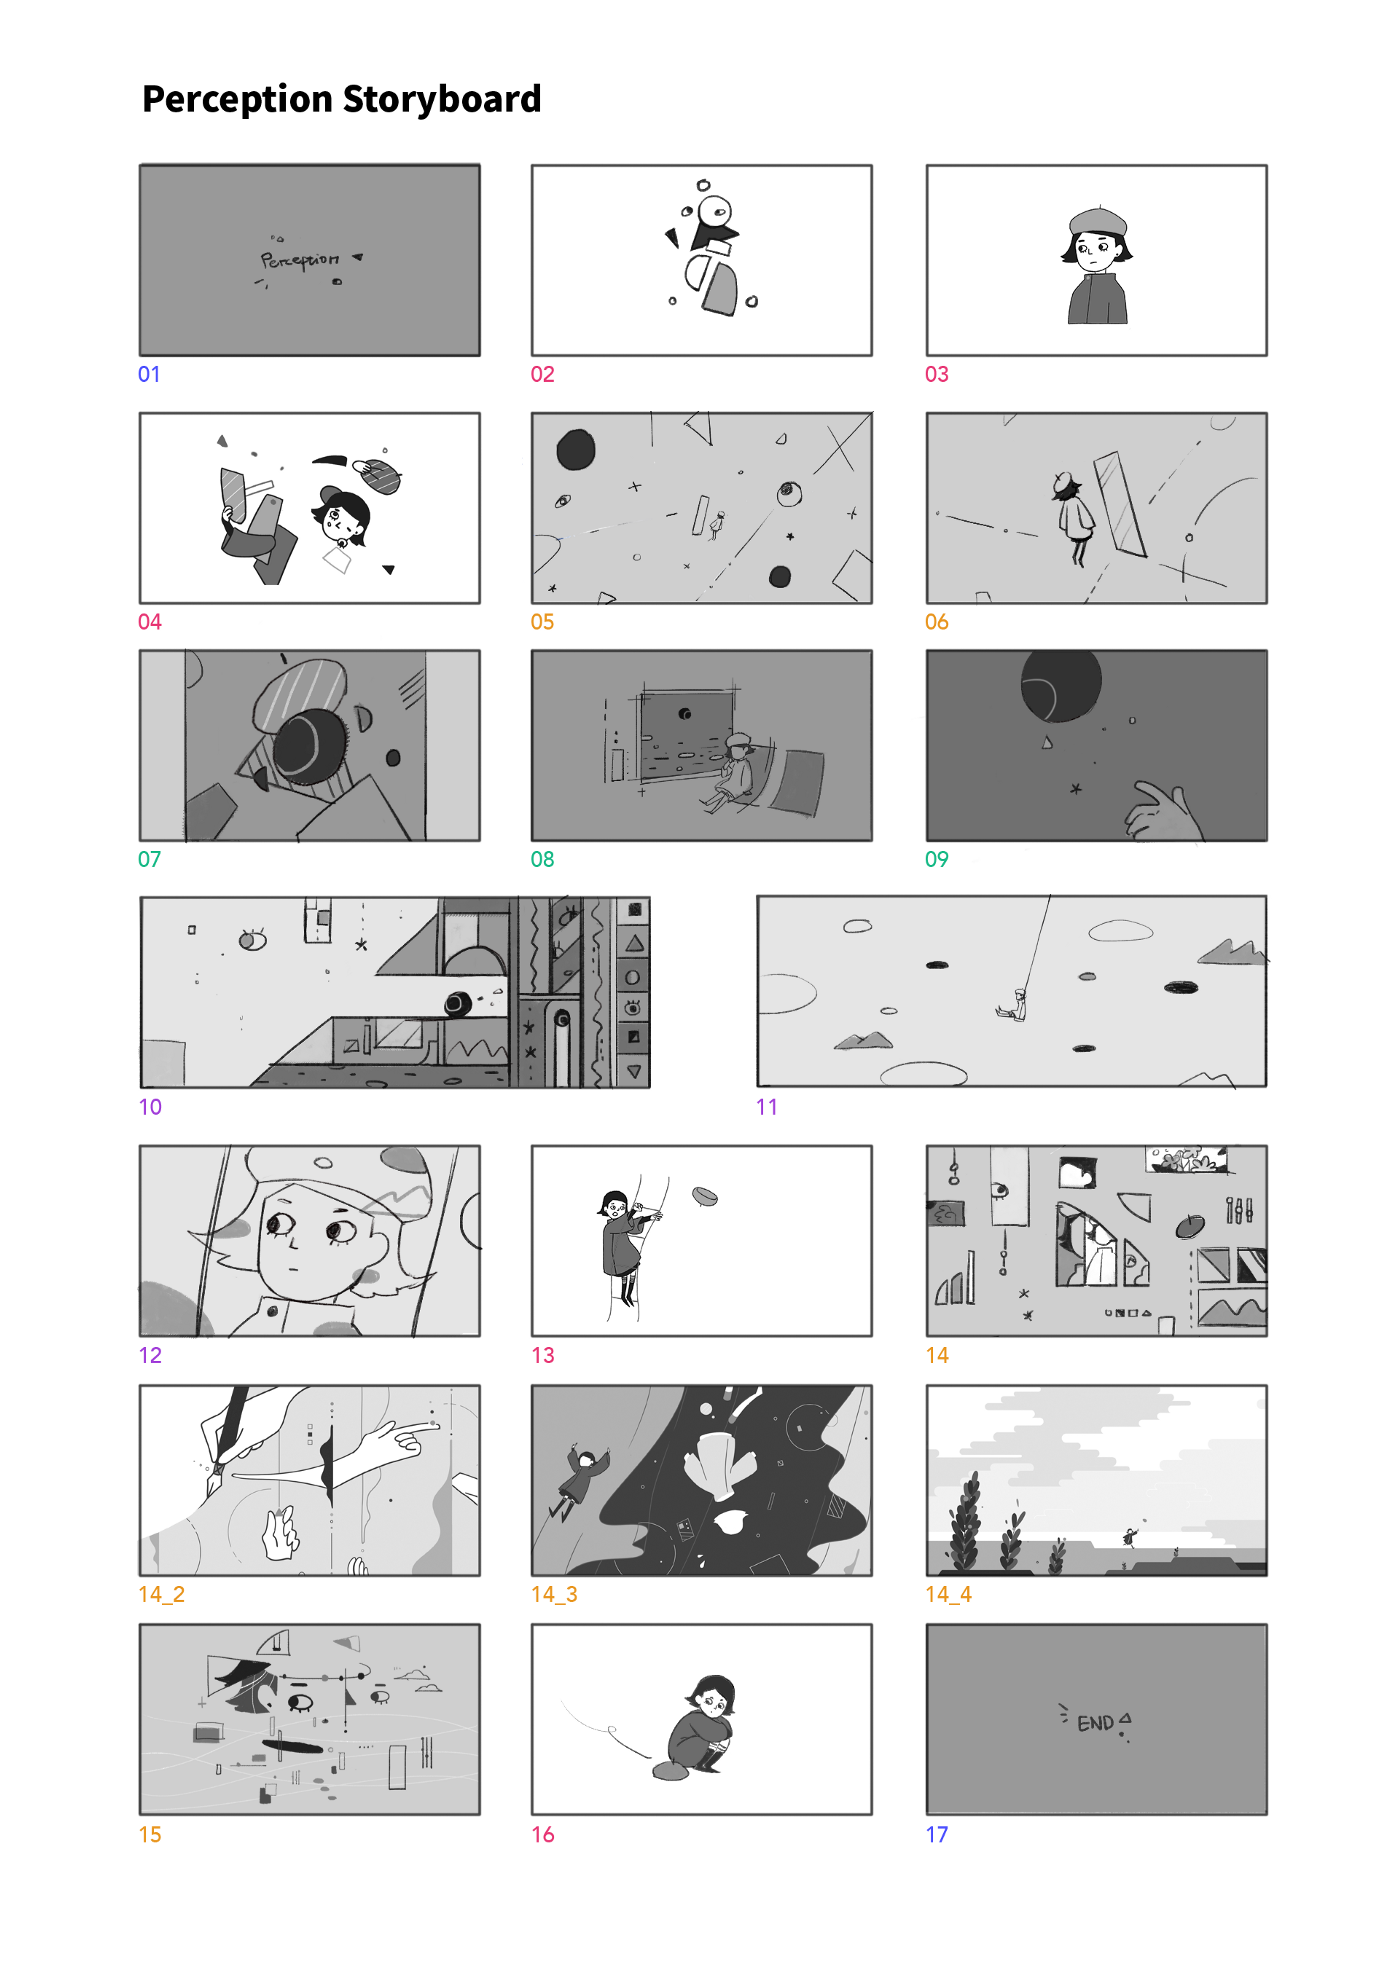 The final storyboard.